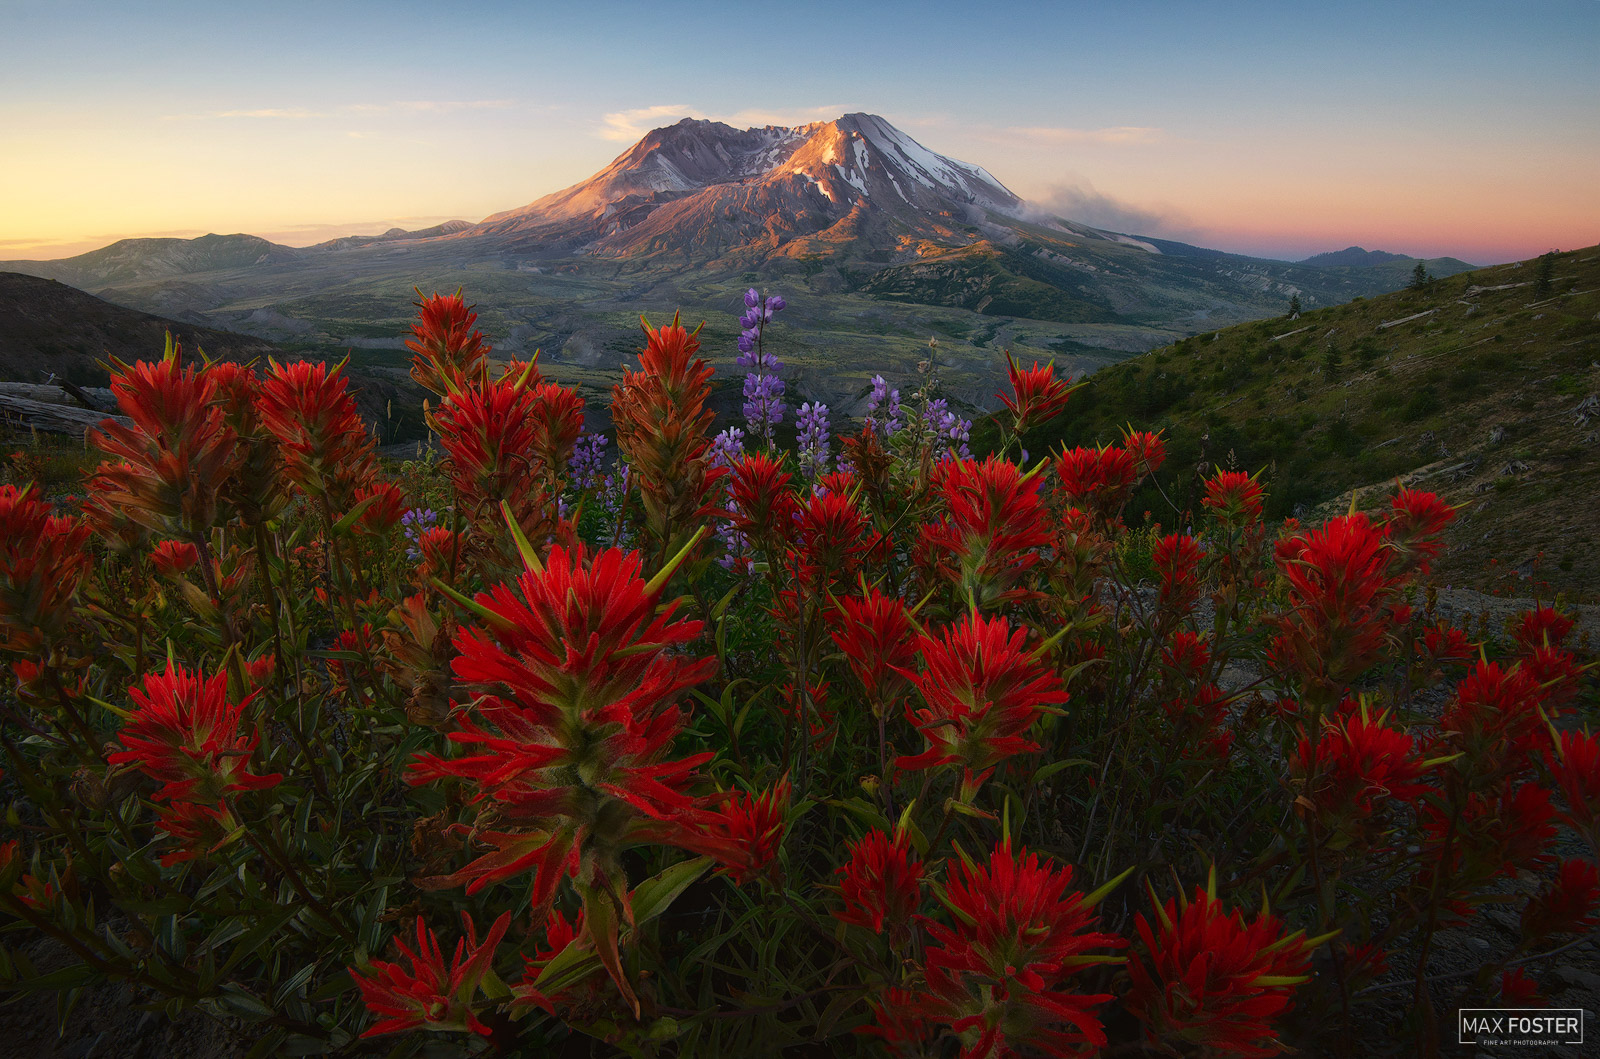 Bring your walls to life with Flower Possee, Max Foster's limited edition photography print of Mount St. Helens in Washington...